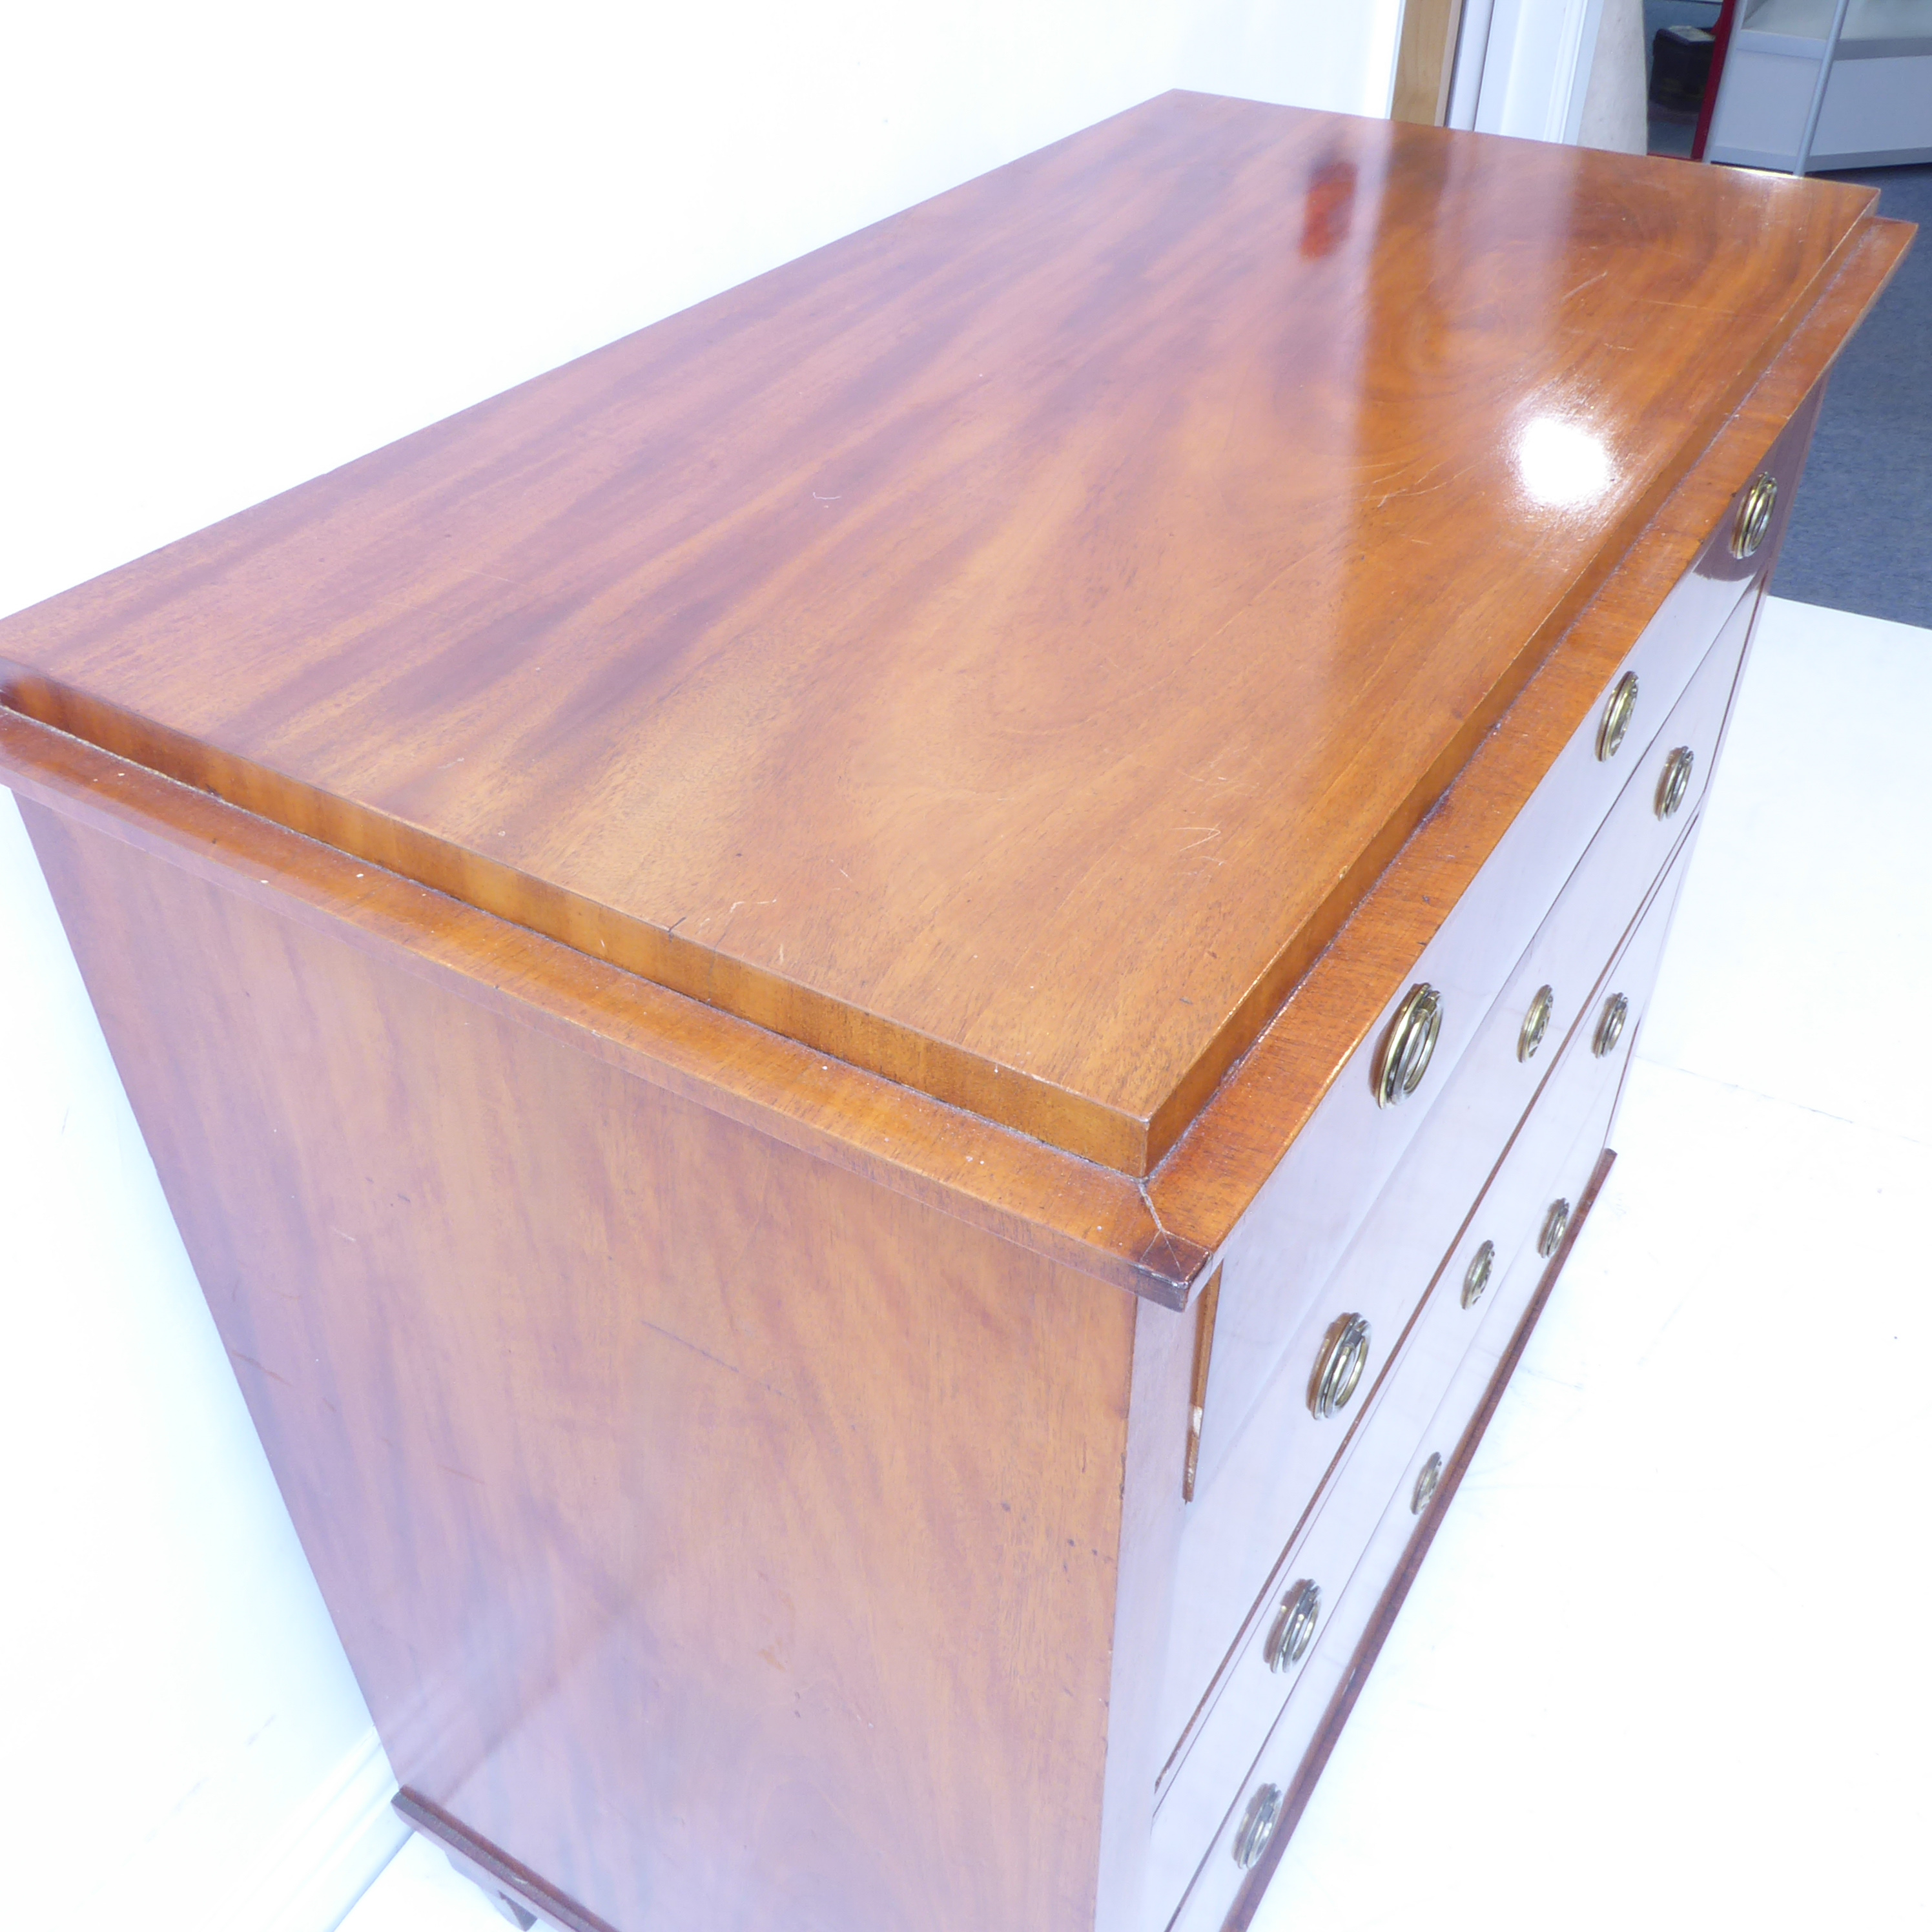 A 19th century continental mahogany secrétaire chest; the full width top drawer opening to reveal - Image 4 of 8